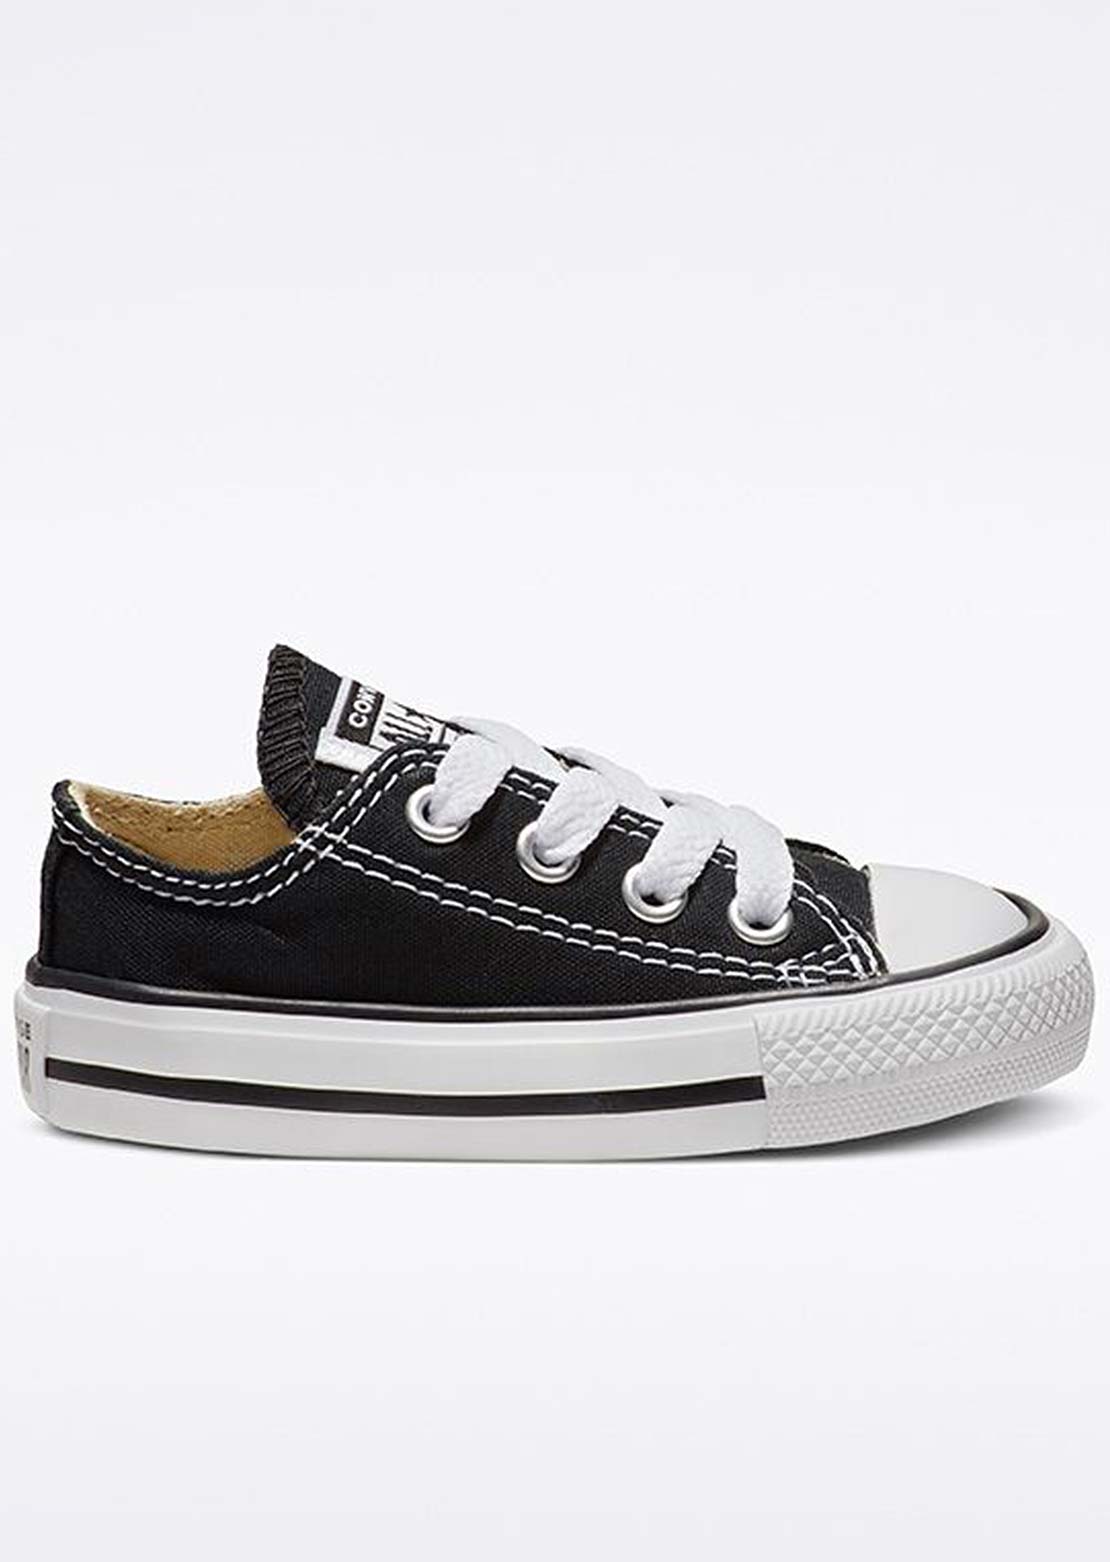 Converse Infant Chuck Taylor All Star Low-Top Shoes Black